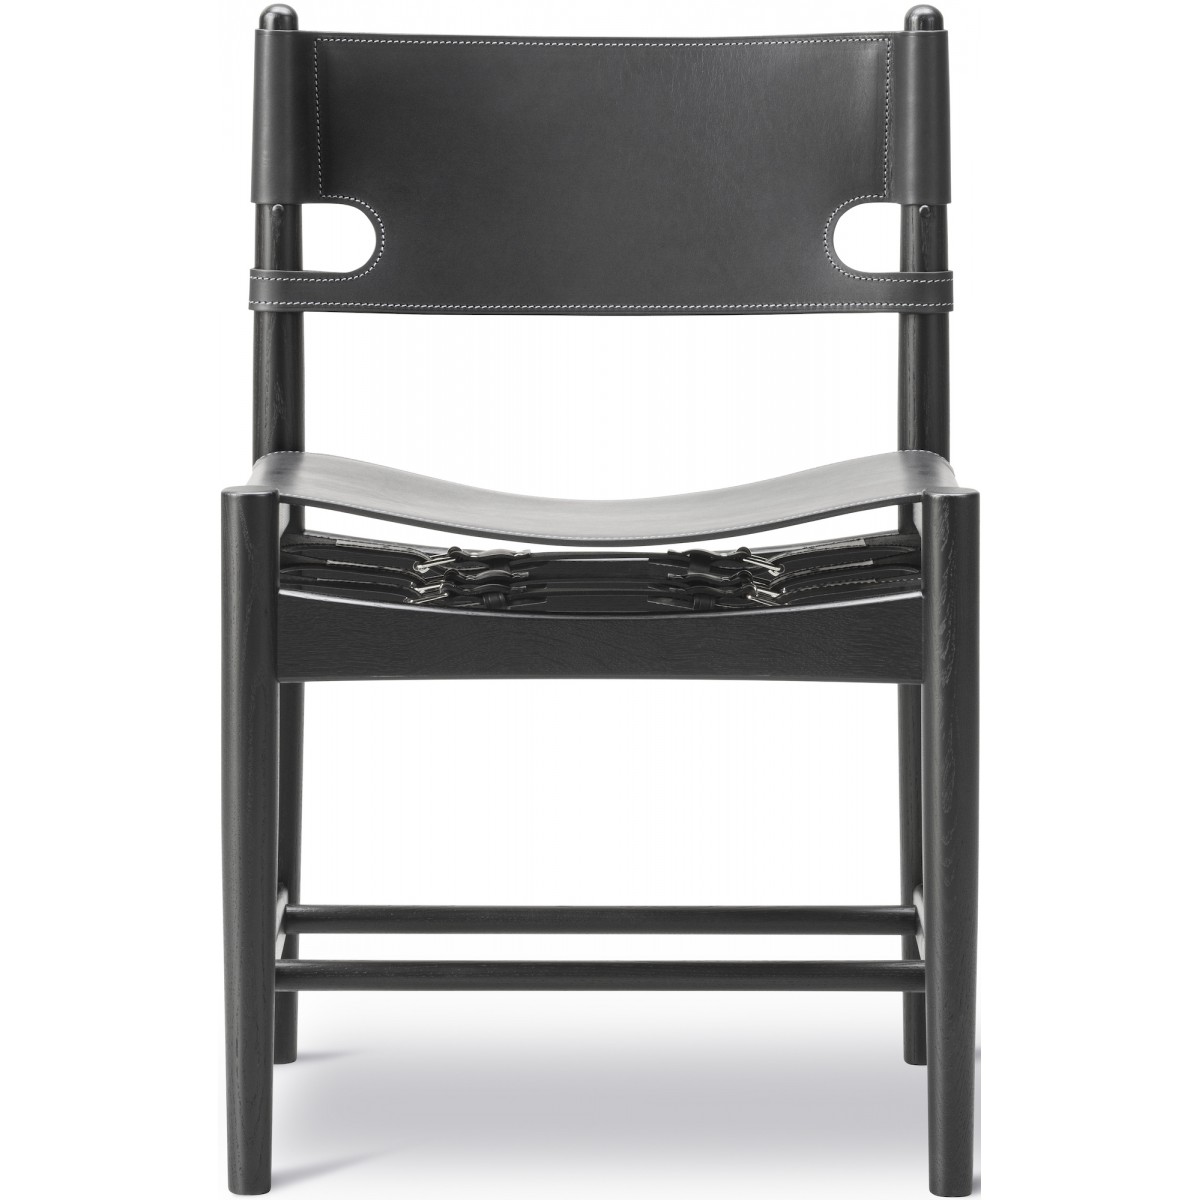 SOLD OUT black leather / black lacquered oak - Spanish dining chair 3237